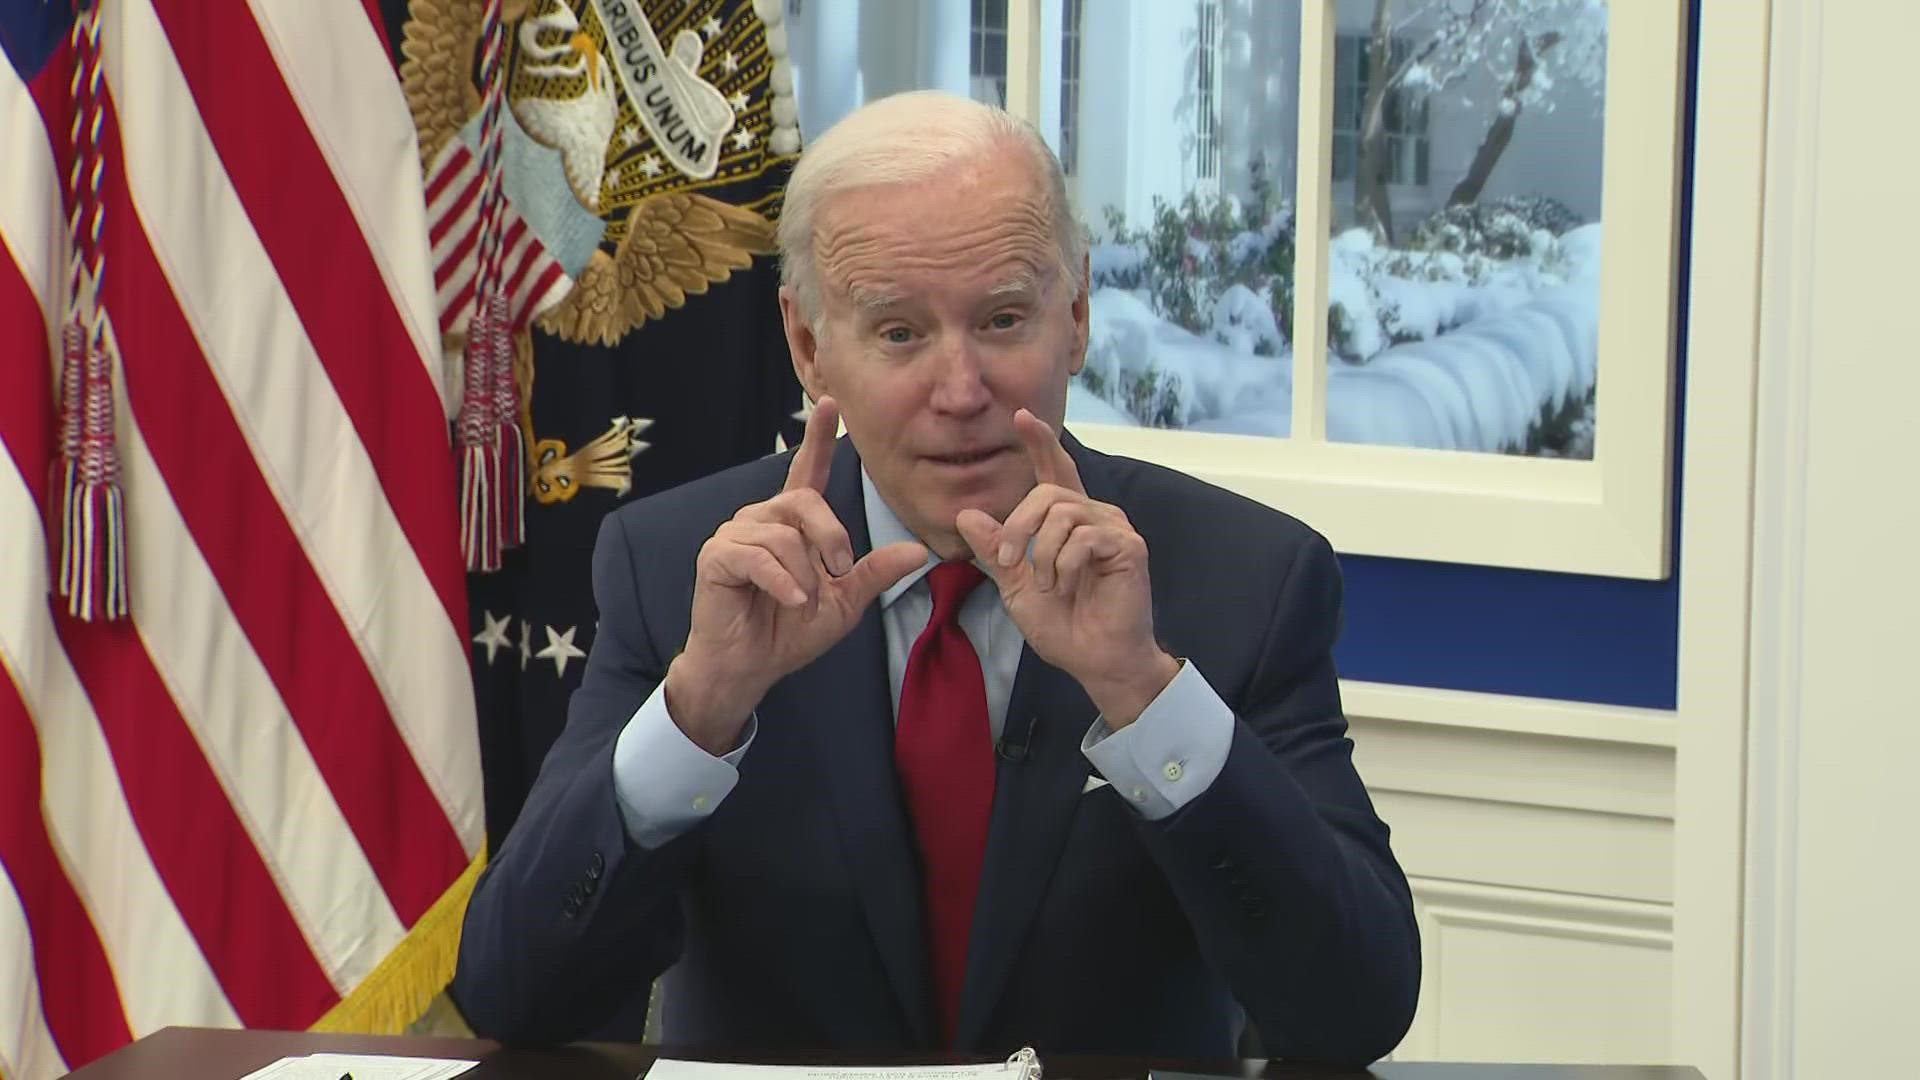 President Joe Biden announced Tuesday the federal government is now planning to purchase 20 million COVID-19 treatment pills from Pfizer.